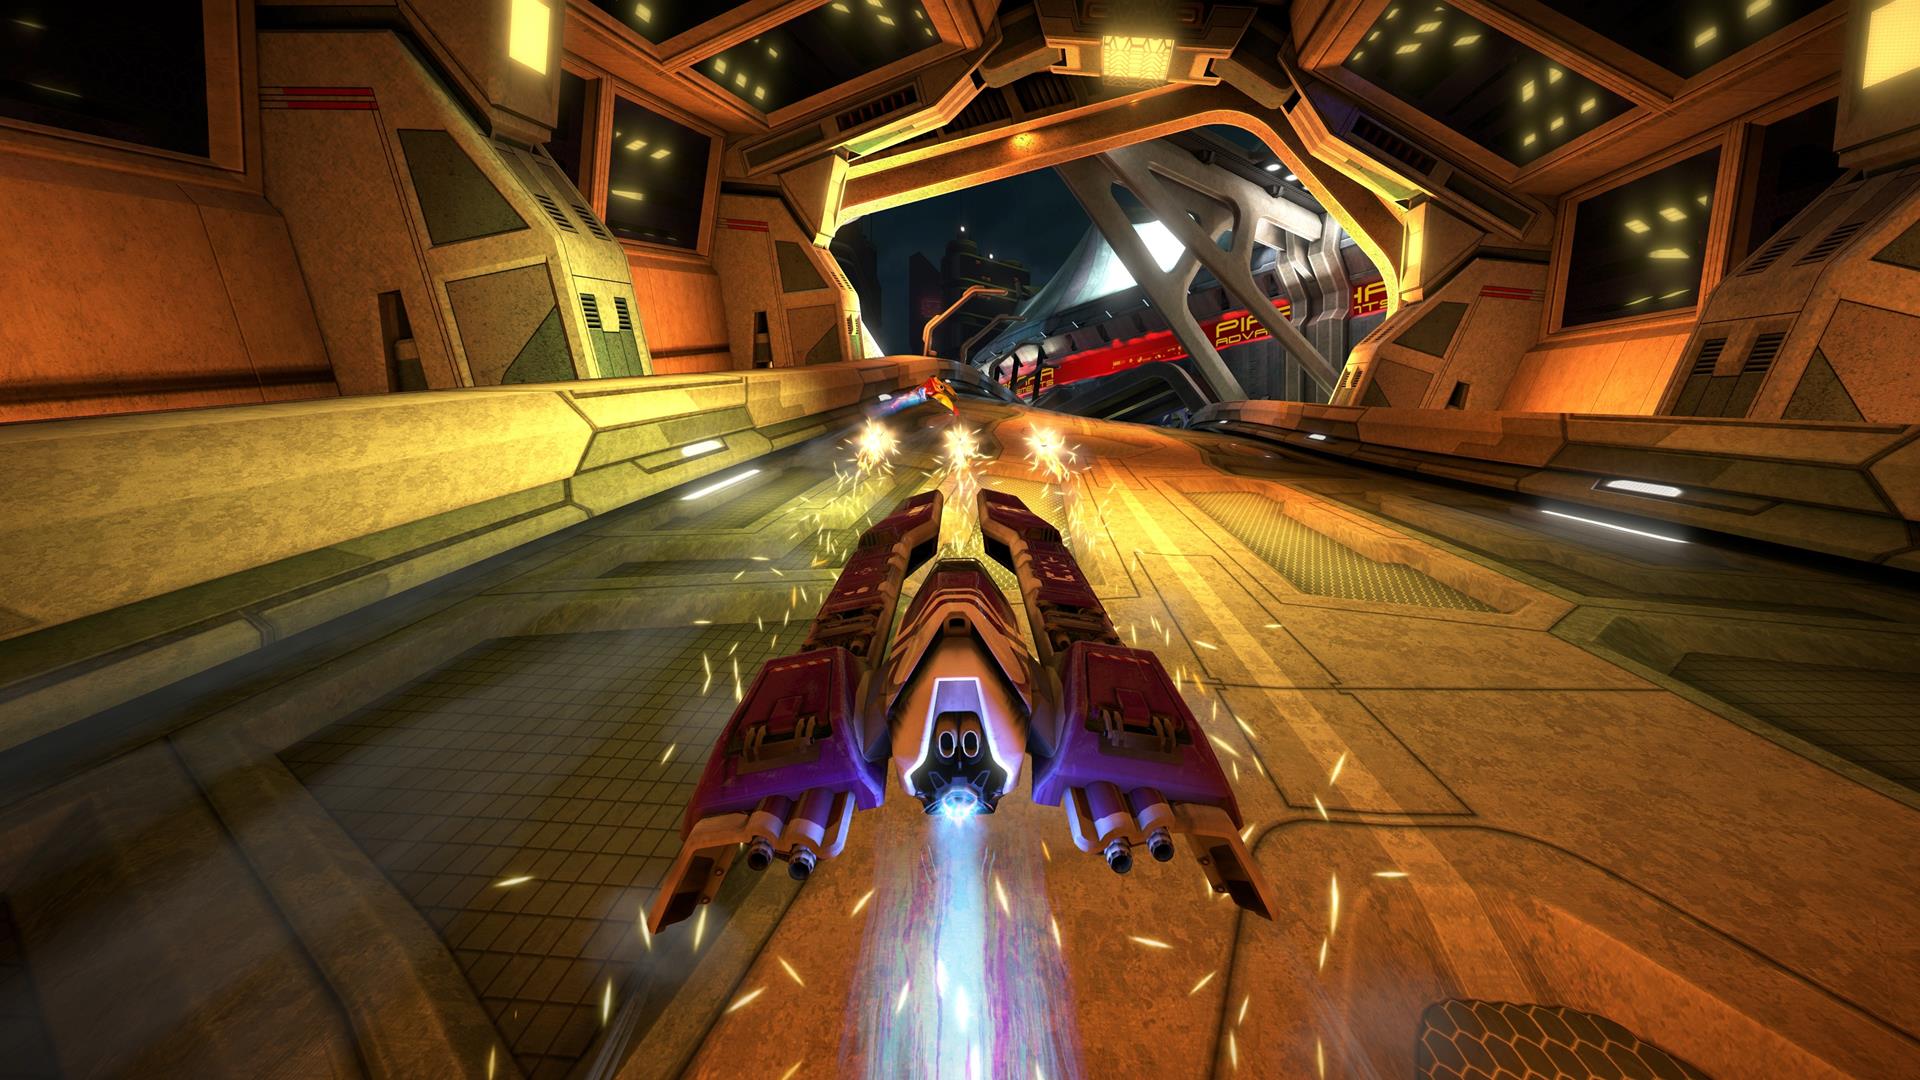 Image for We're streaming Wipeout Omega Collection on PS4 - will we wipeout? Watch and see for yourself